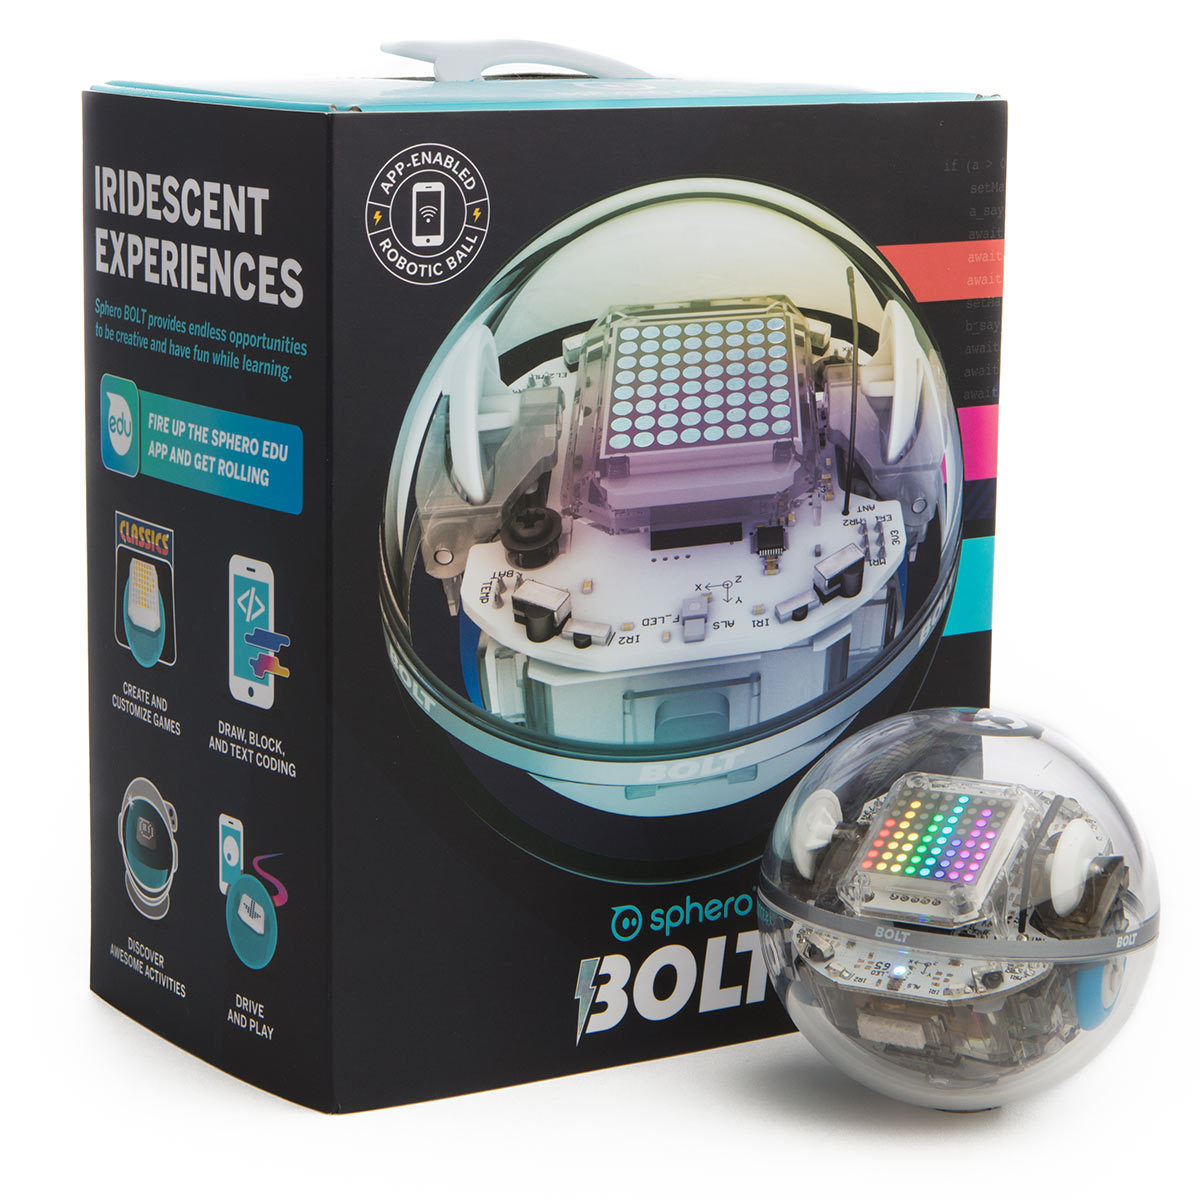 Boxed image of the sphero BOLT with the individual sphero infront